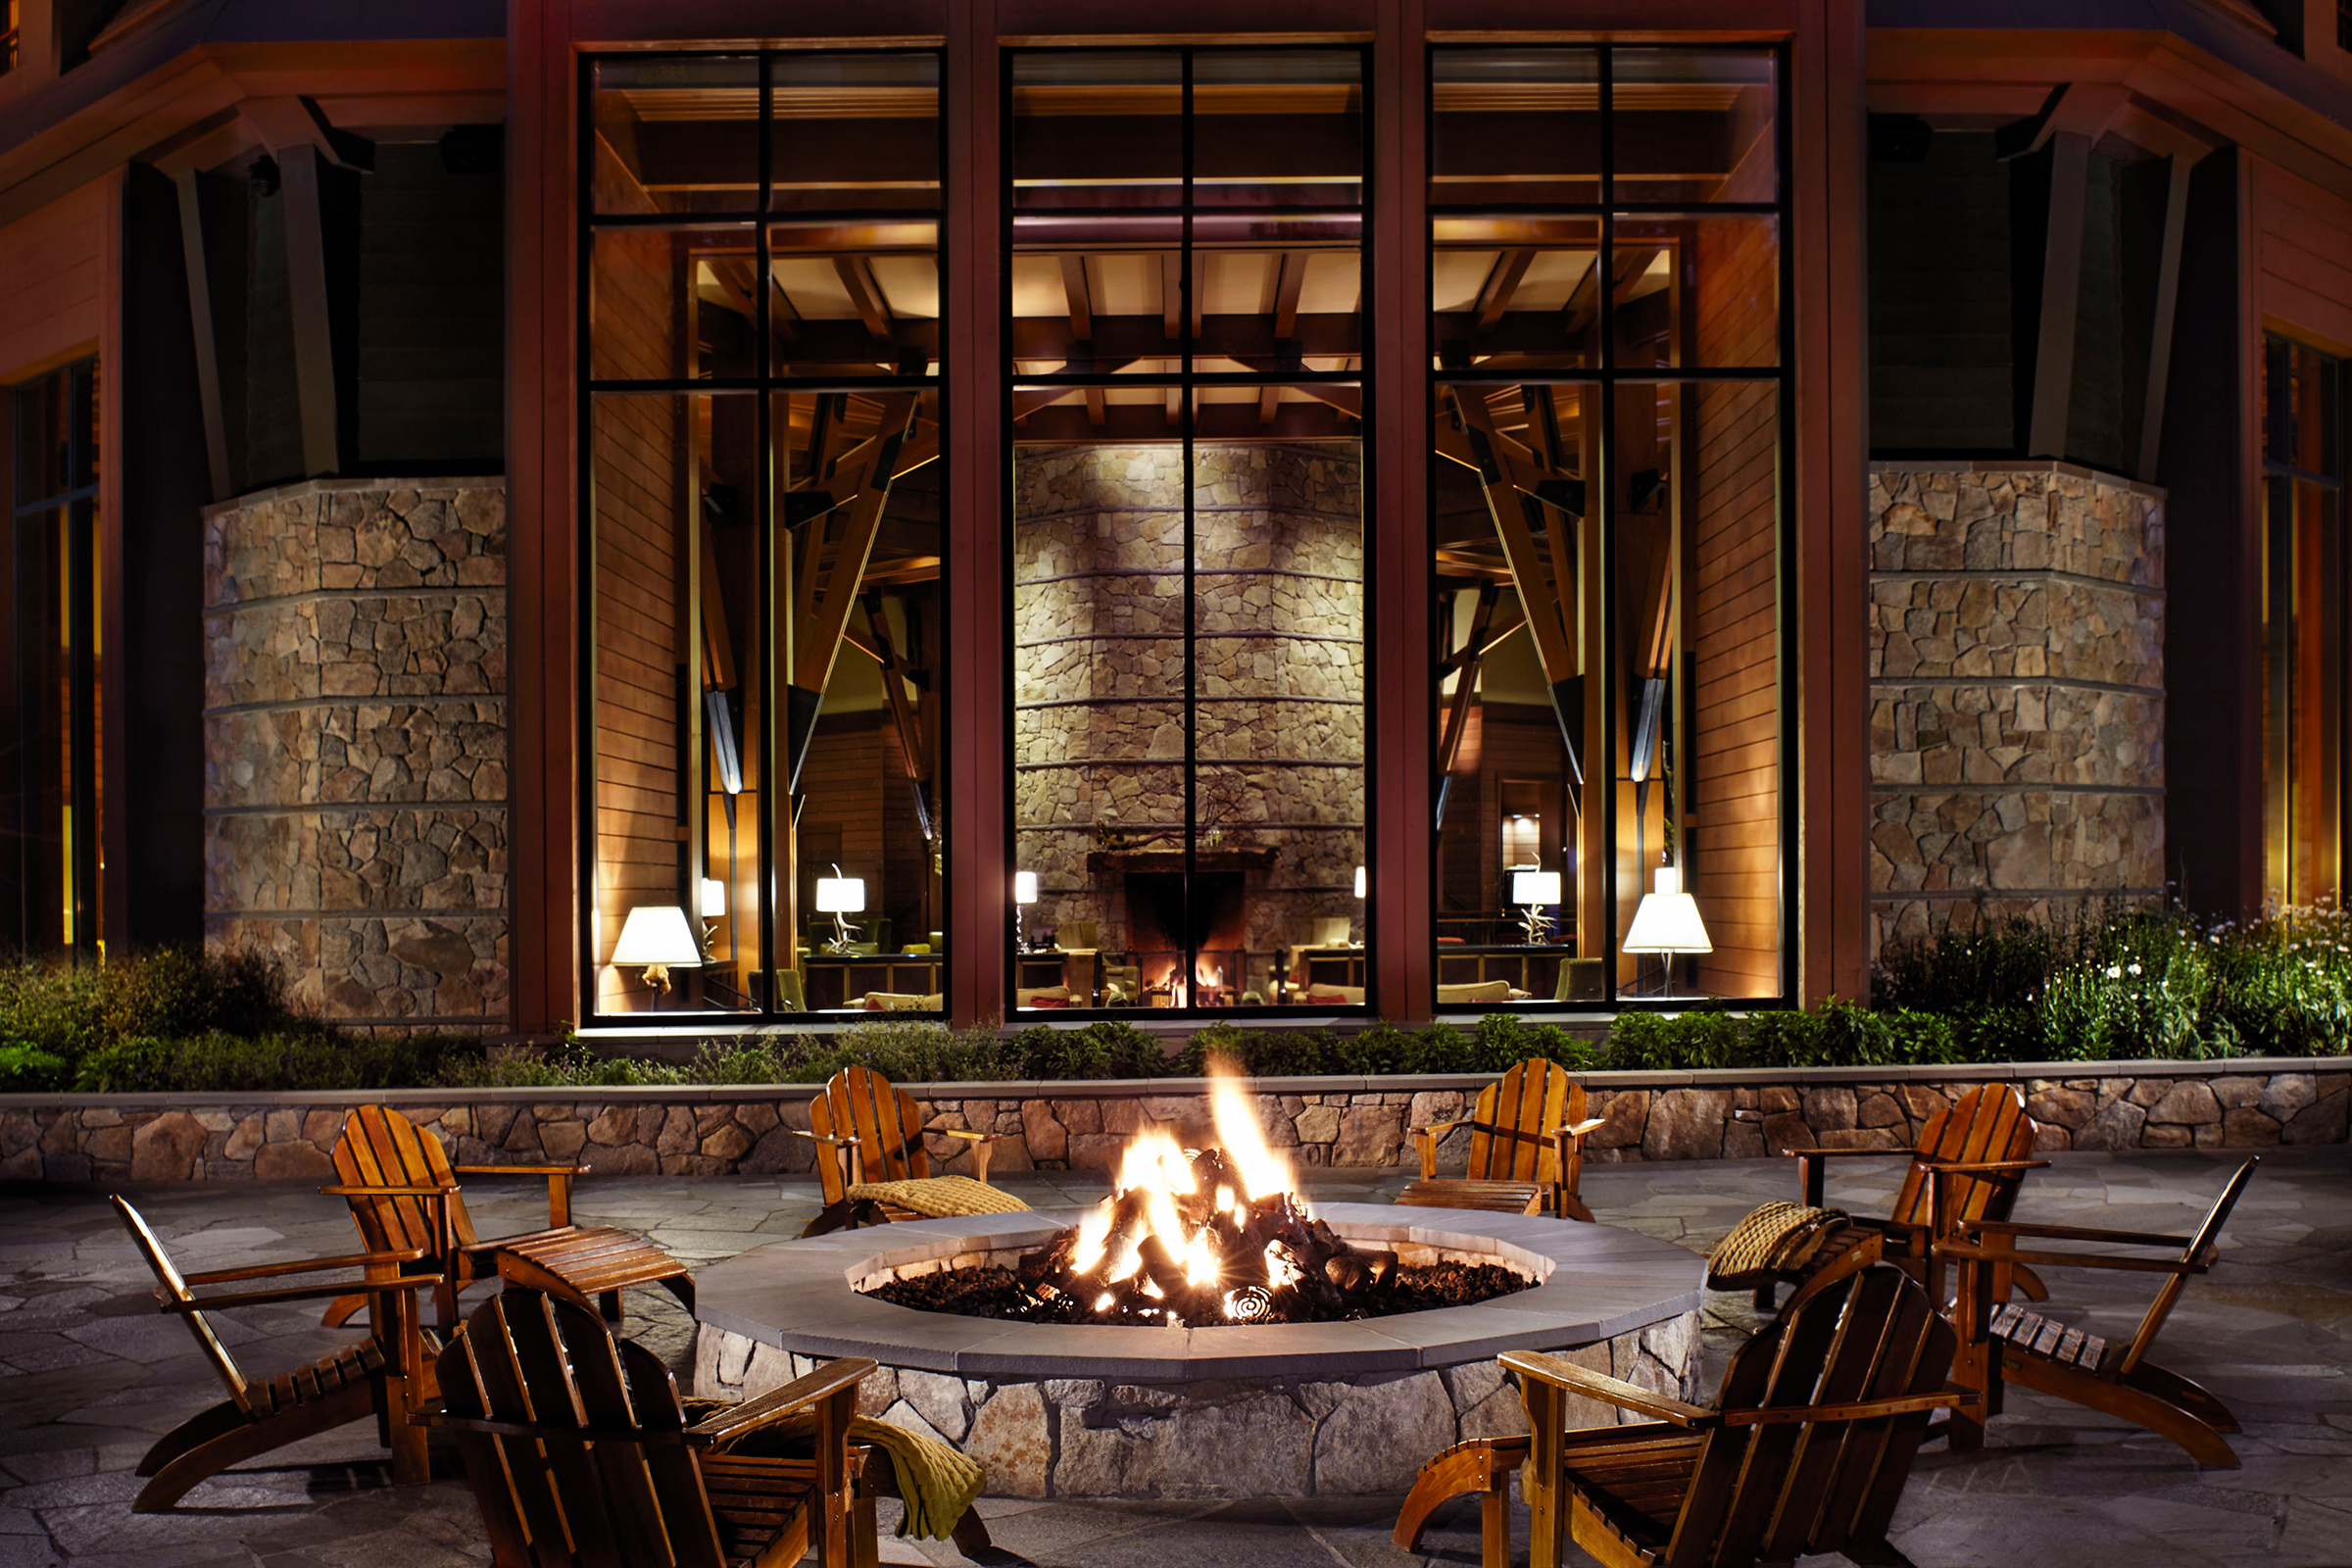 The fire pit at the Ritz Carlton in Lake Tahoe.